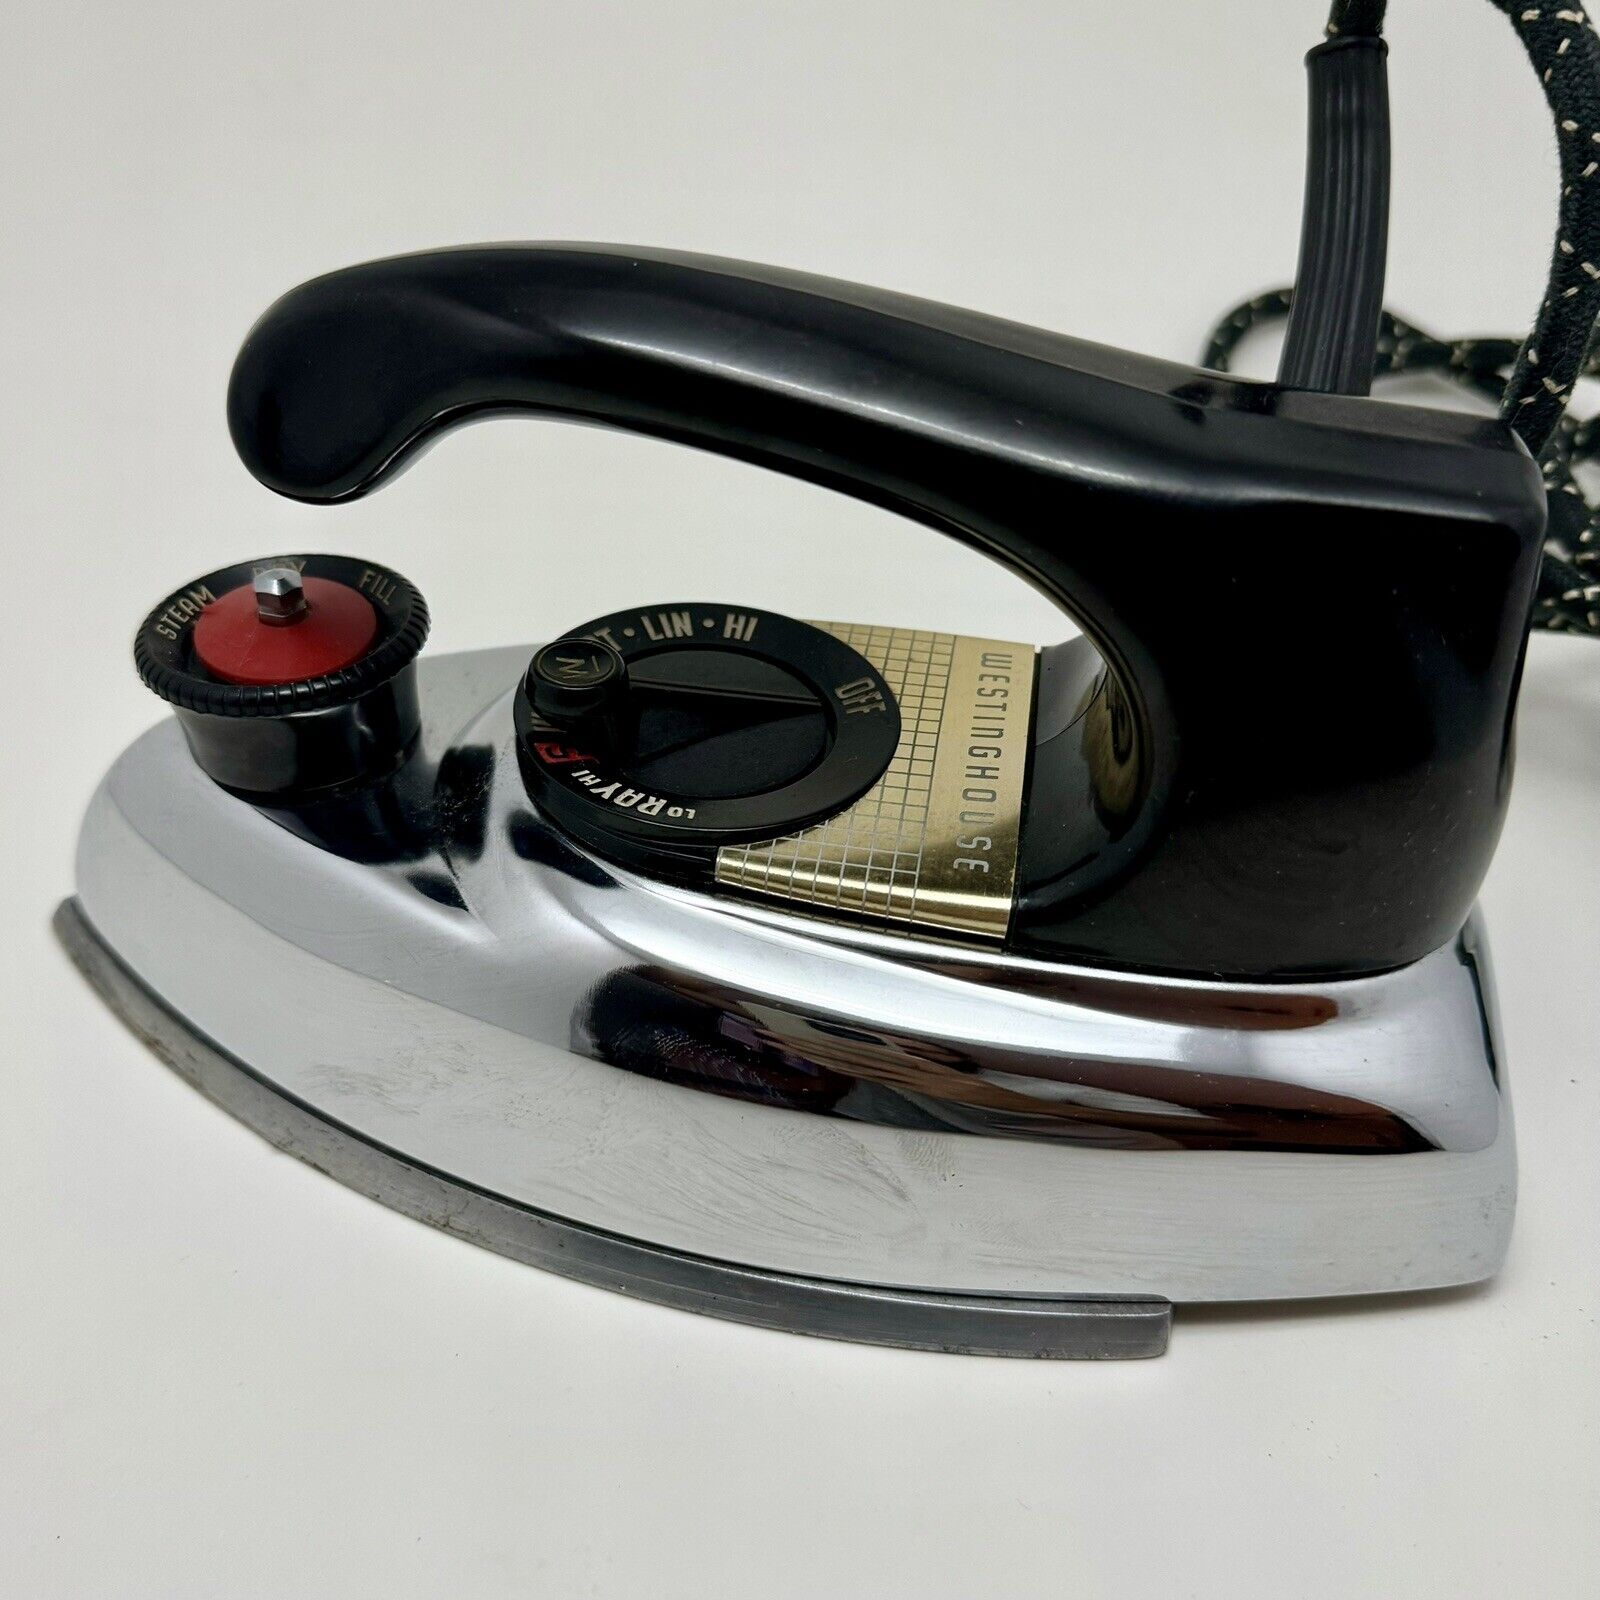 Vintage 1950’s  Westinghouse Adjust-o-matic Steam Iron  IS 5212 - Works